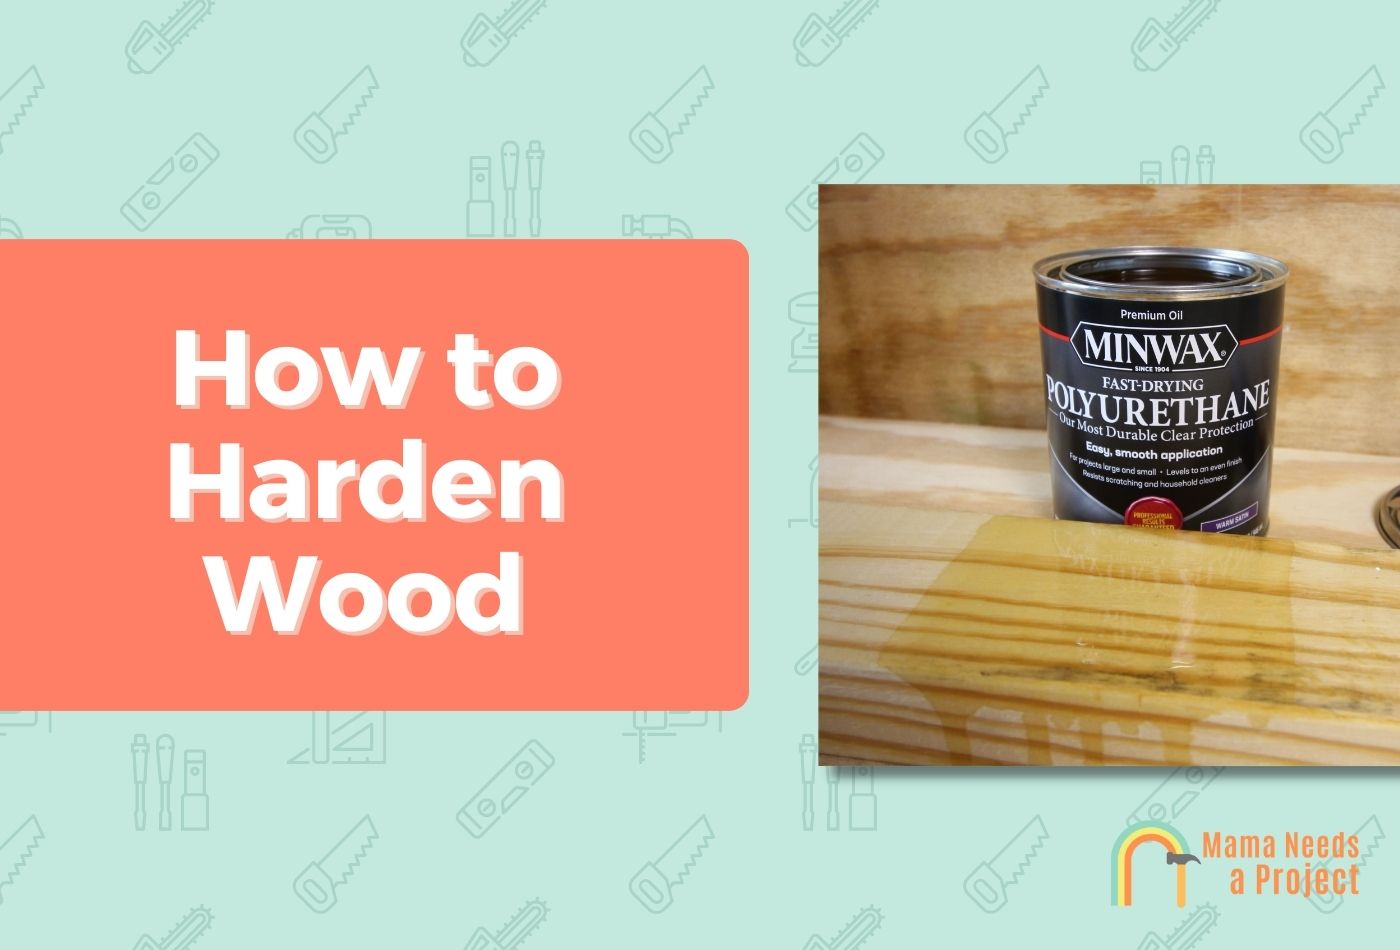 How to Harden Wood